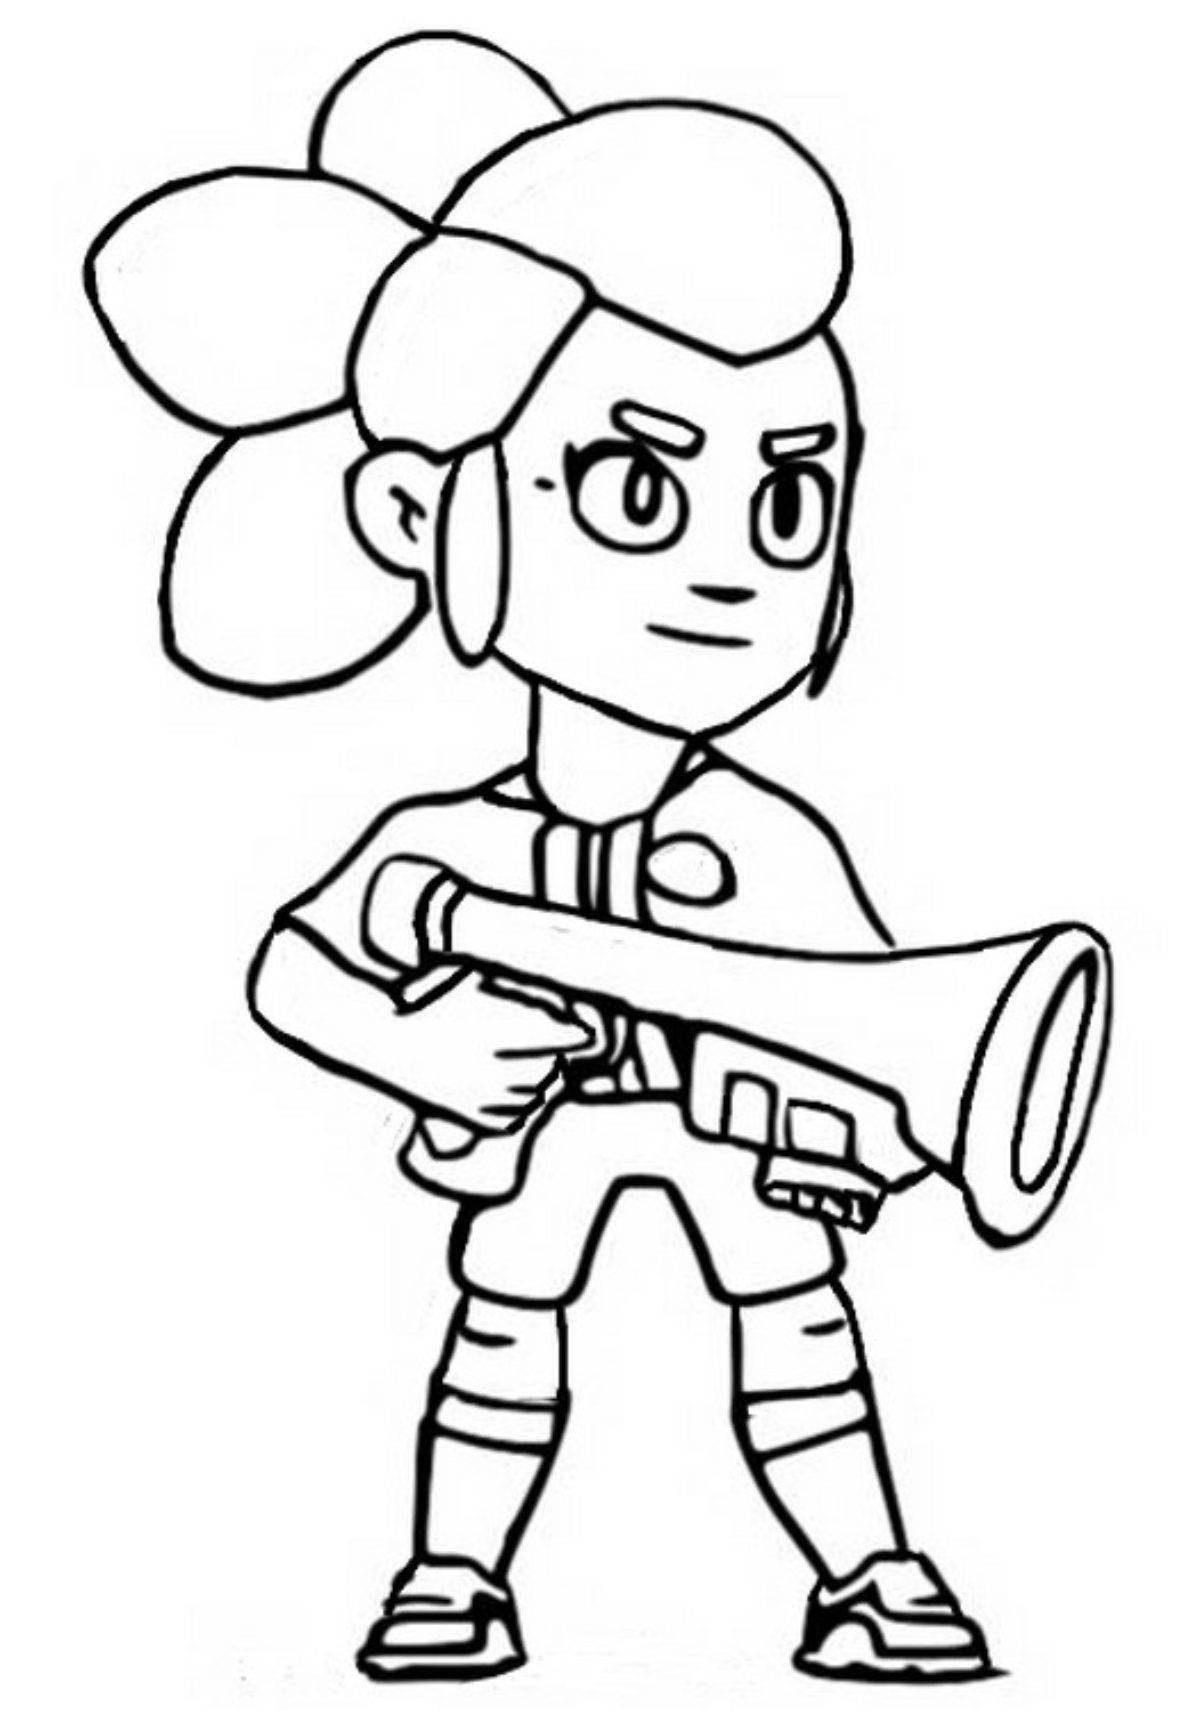 Amazing shelly bravo stars coloring page